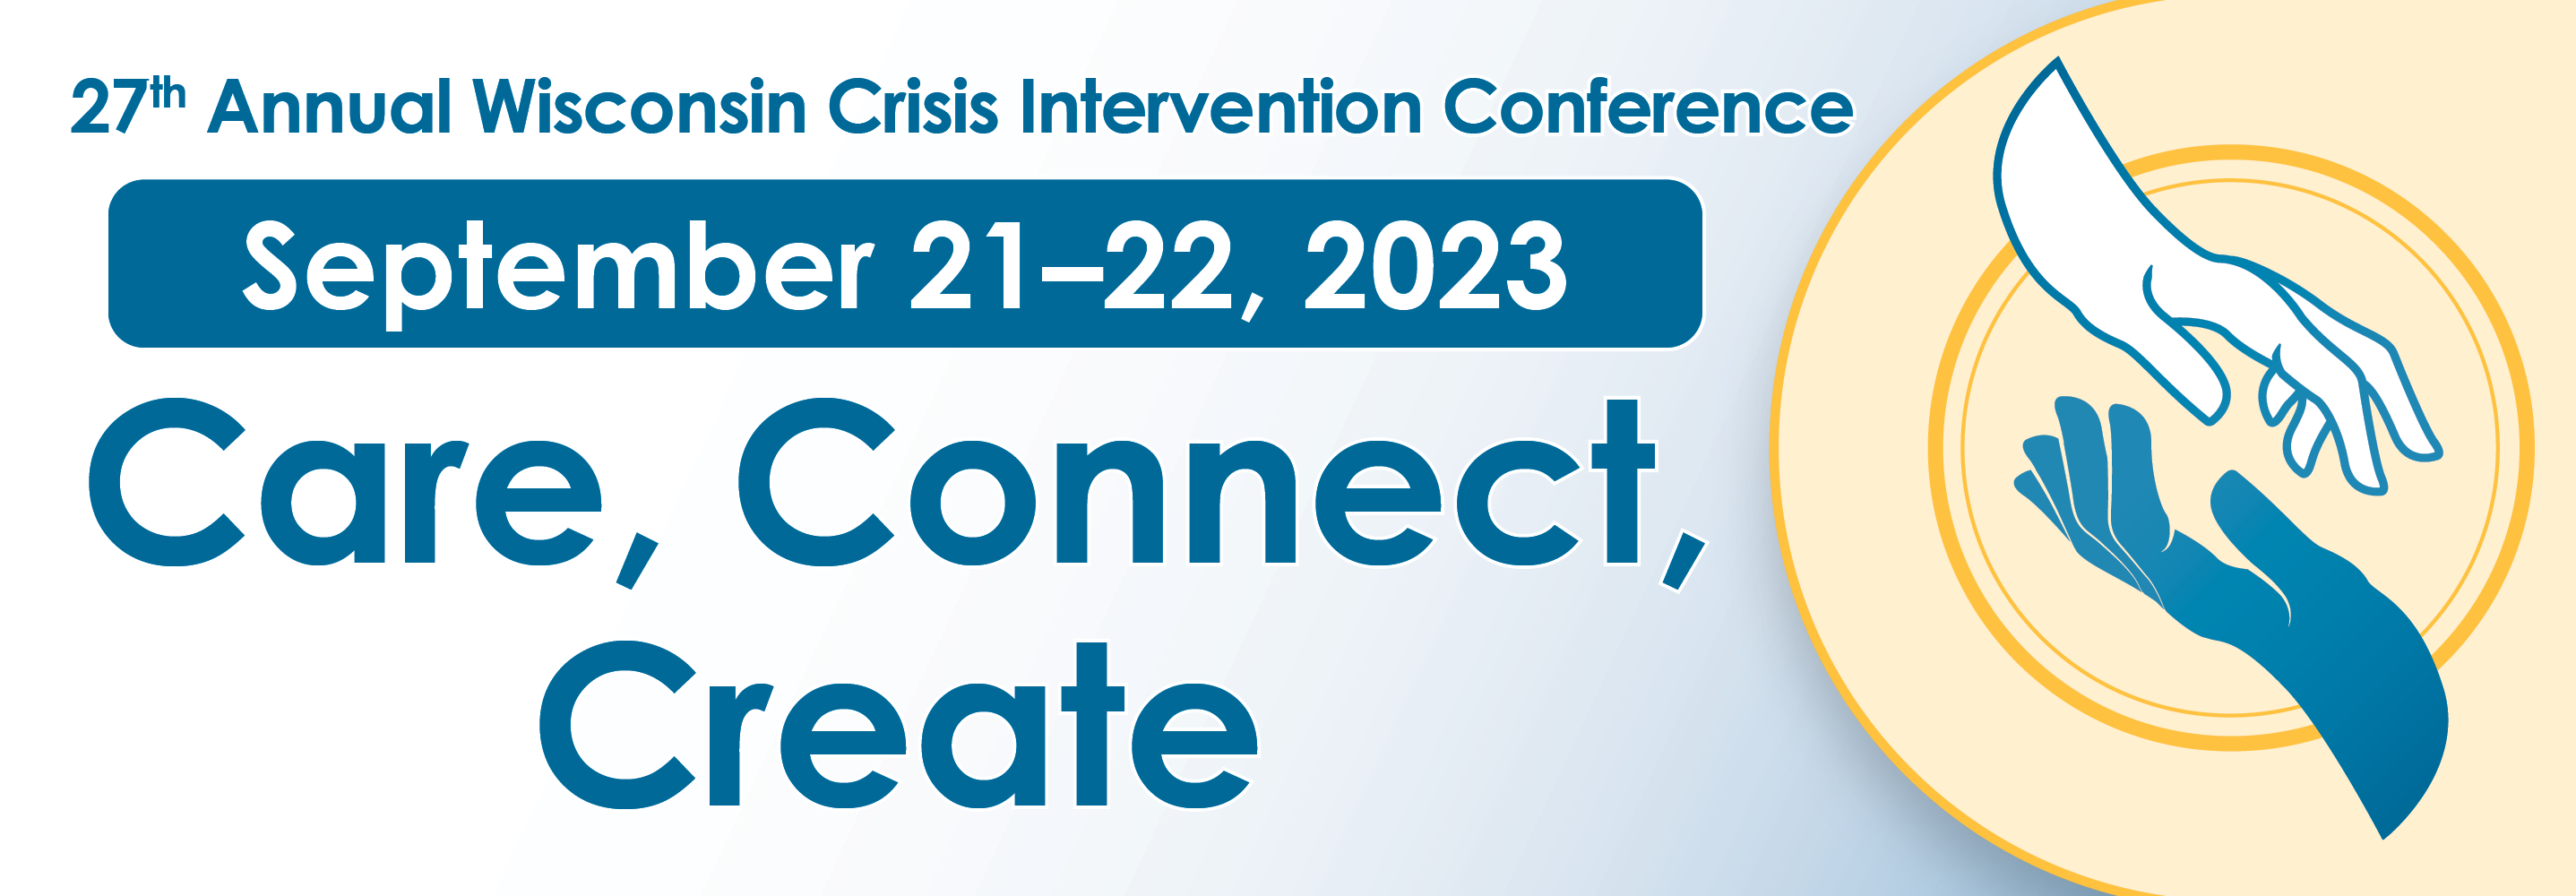 Crisis Intervention Conference Continuing Education and Outreach UWSP